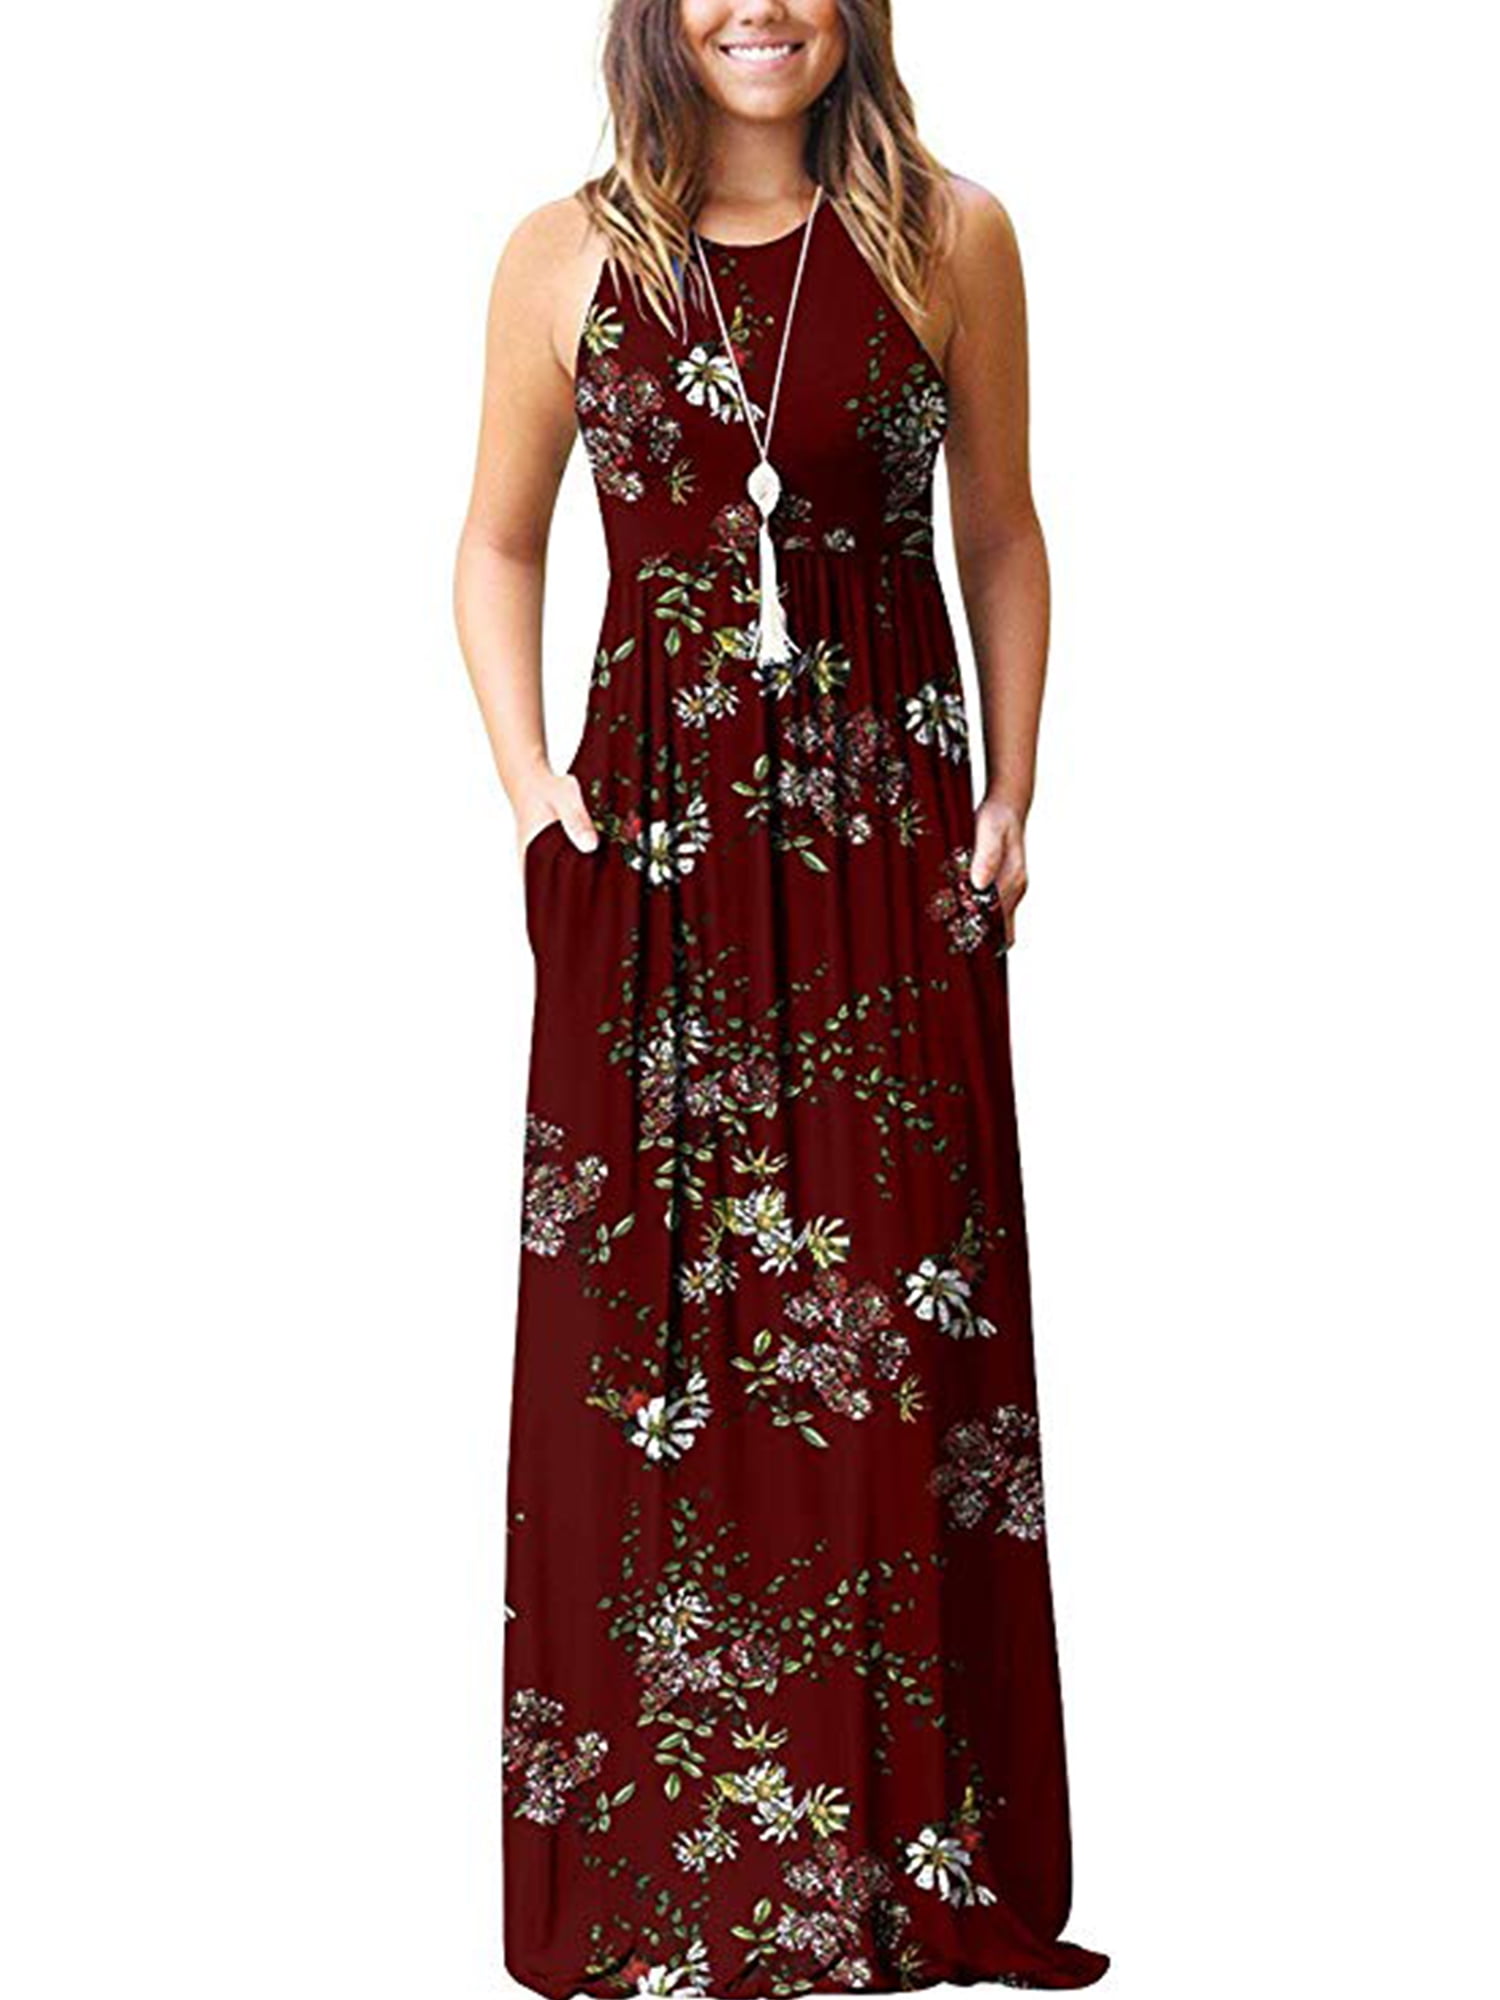 Women Dress Maxi Womens Party Casual Long Evening summer Floral Fashion Cocktail 